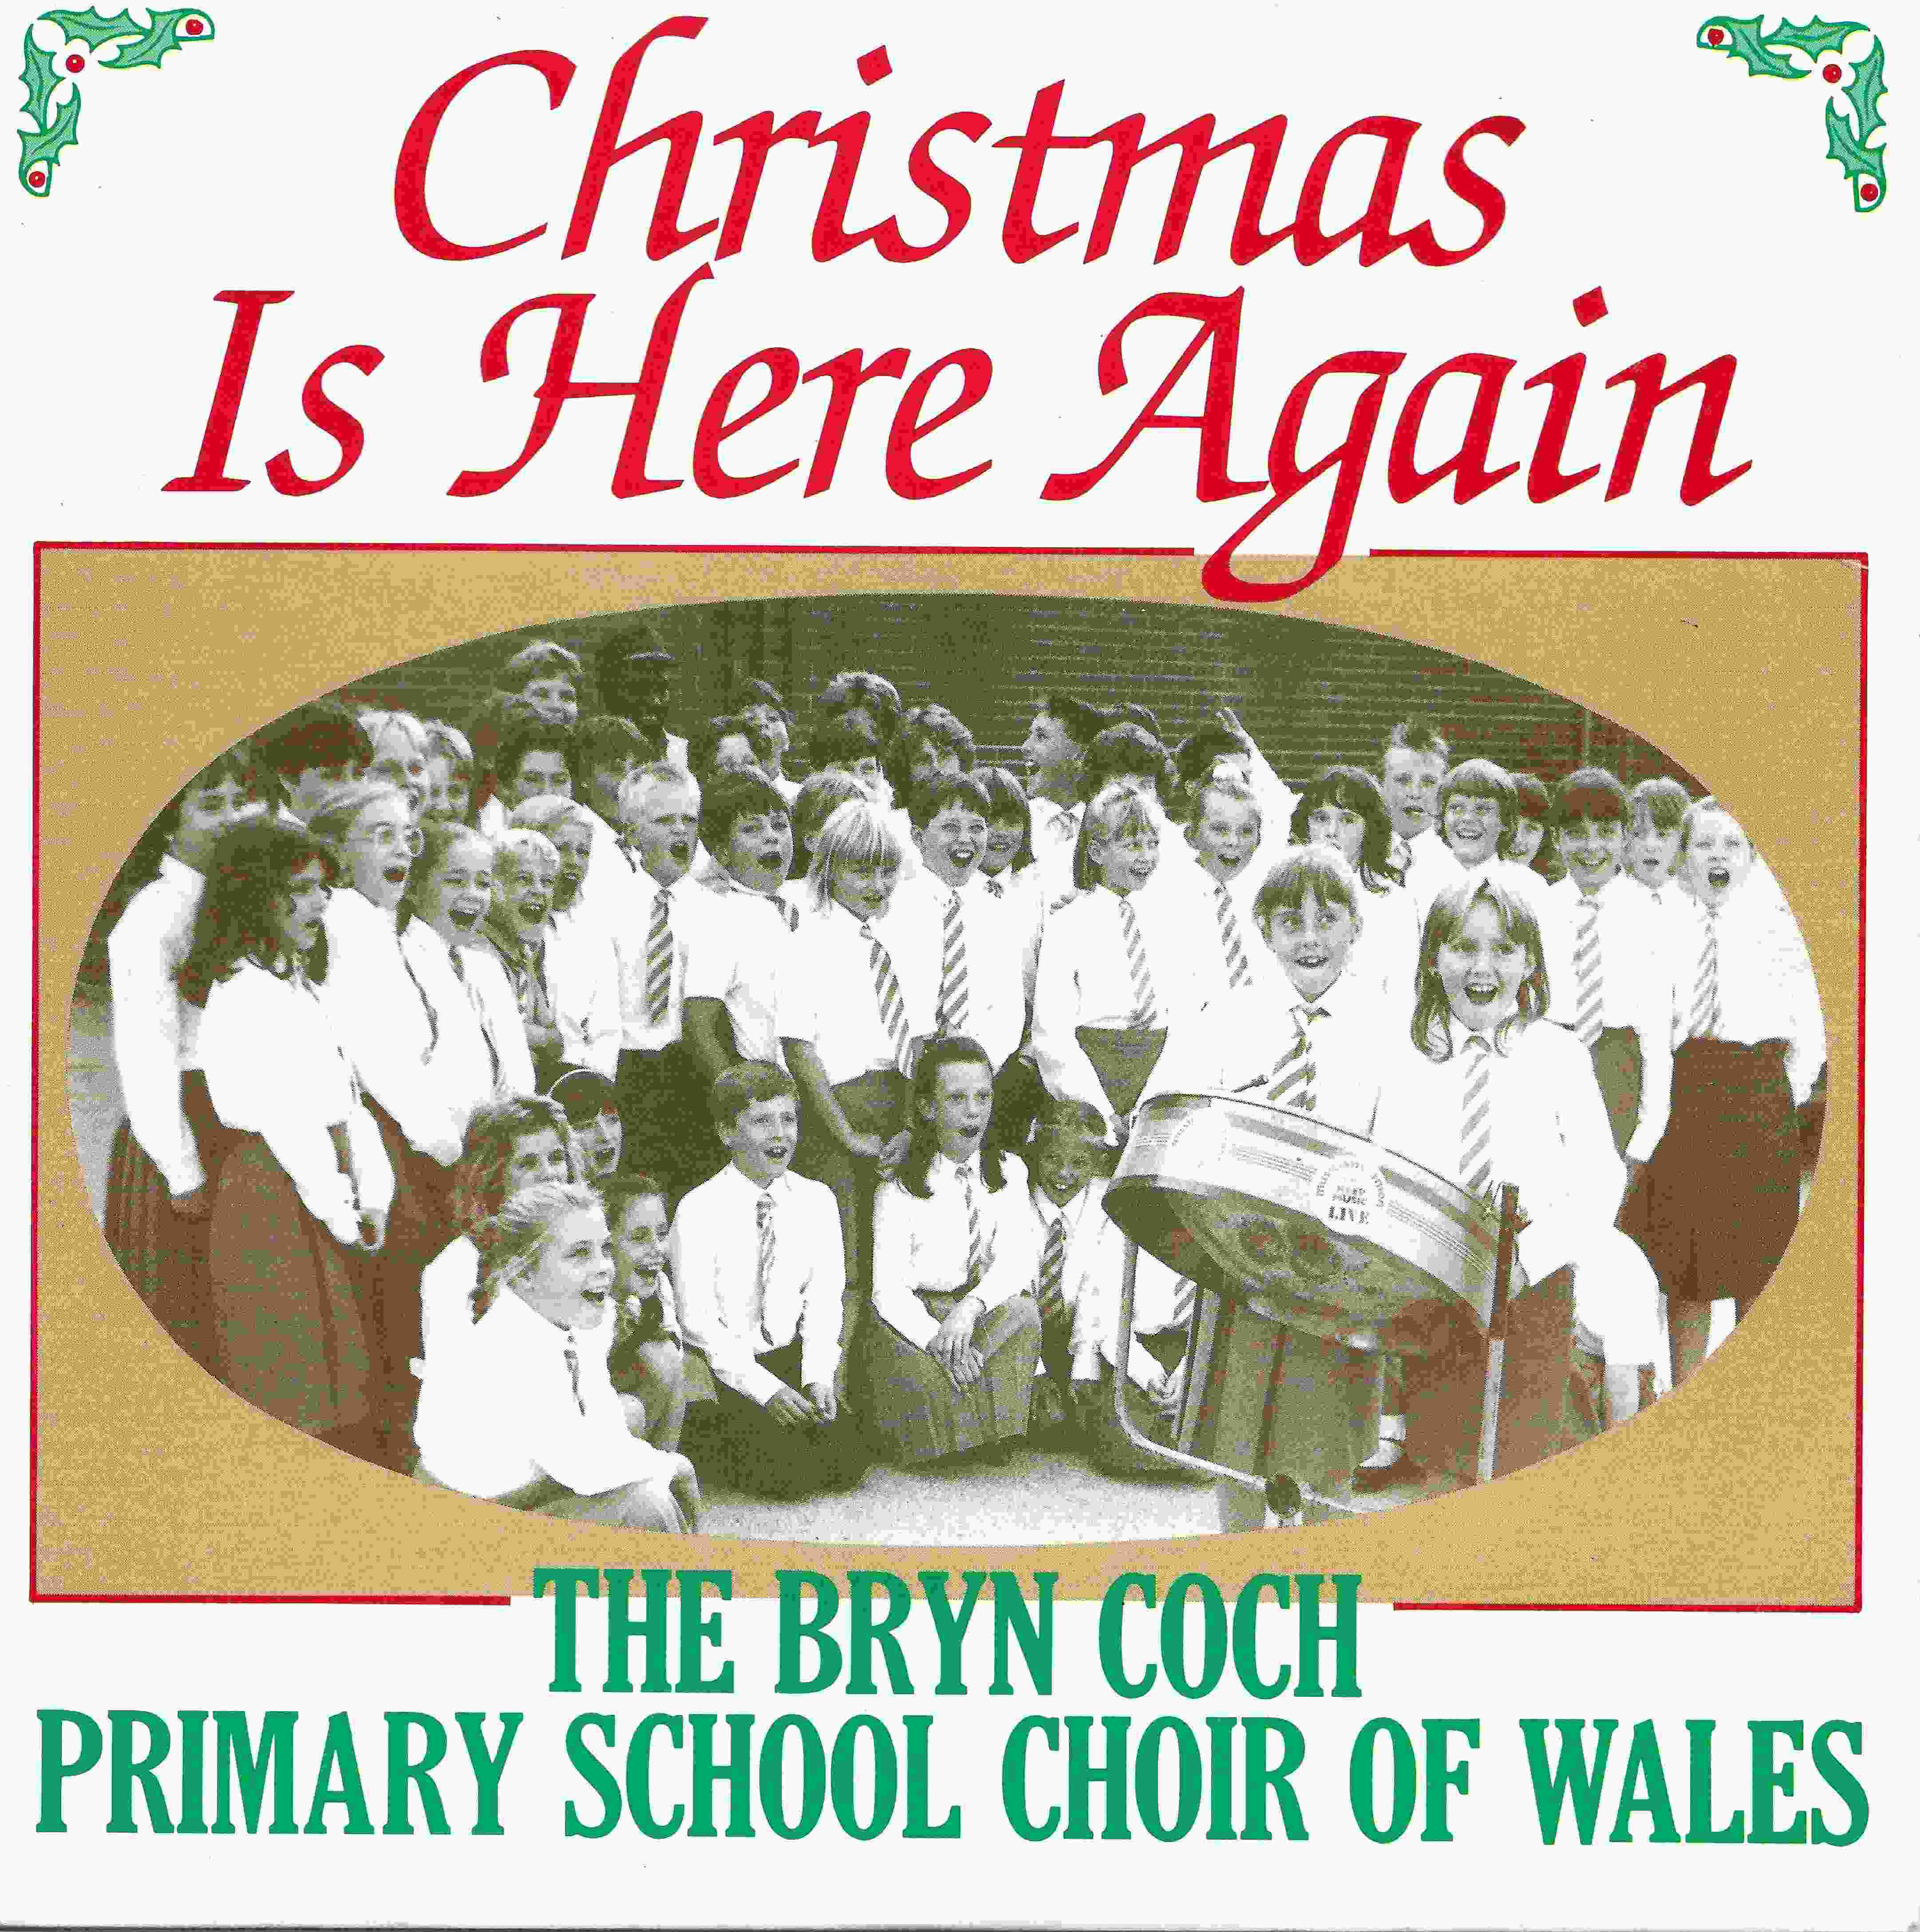 Picture of RESL 234 Christmas is here again by artist The Bryn Coch Primary School Choir of Wales from the BBC singles - Records and Tapes library